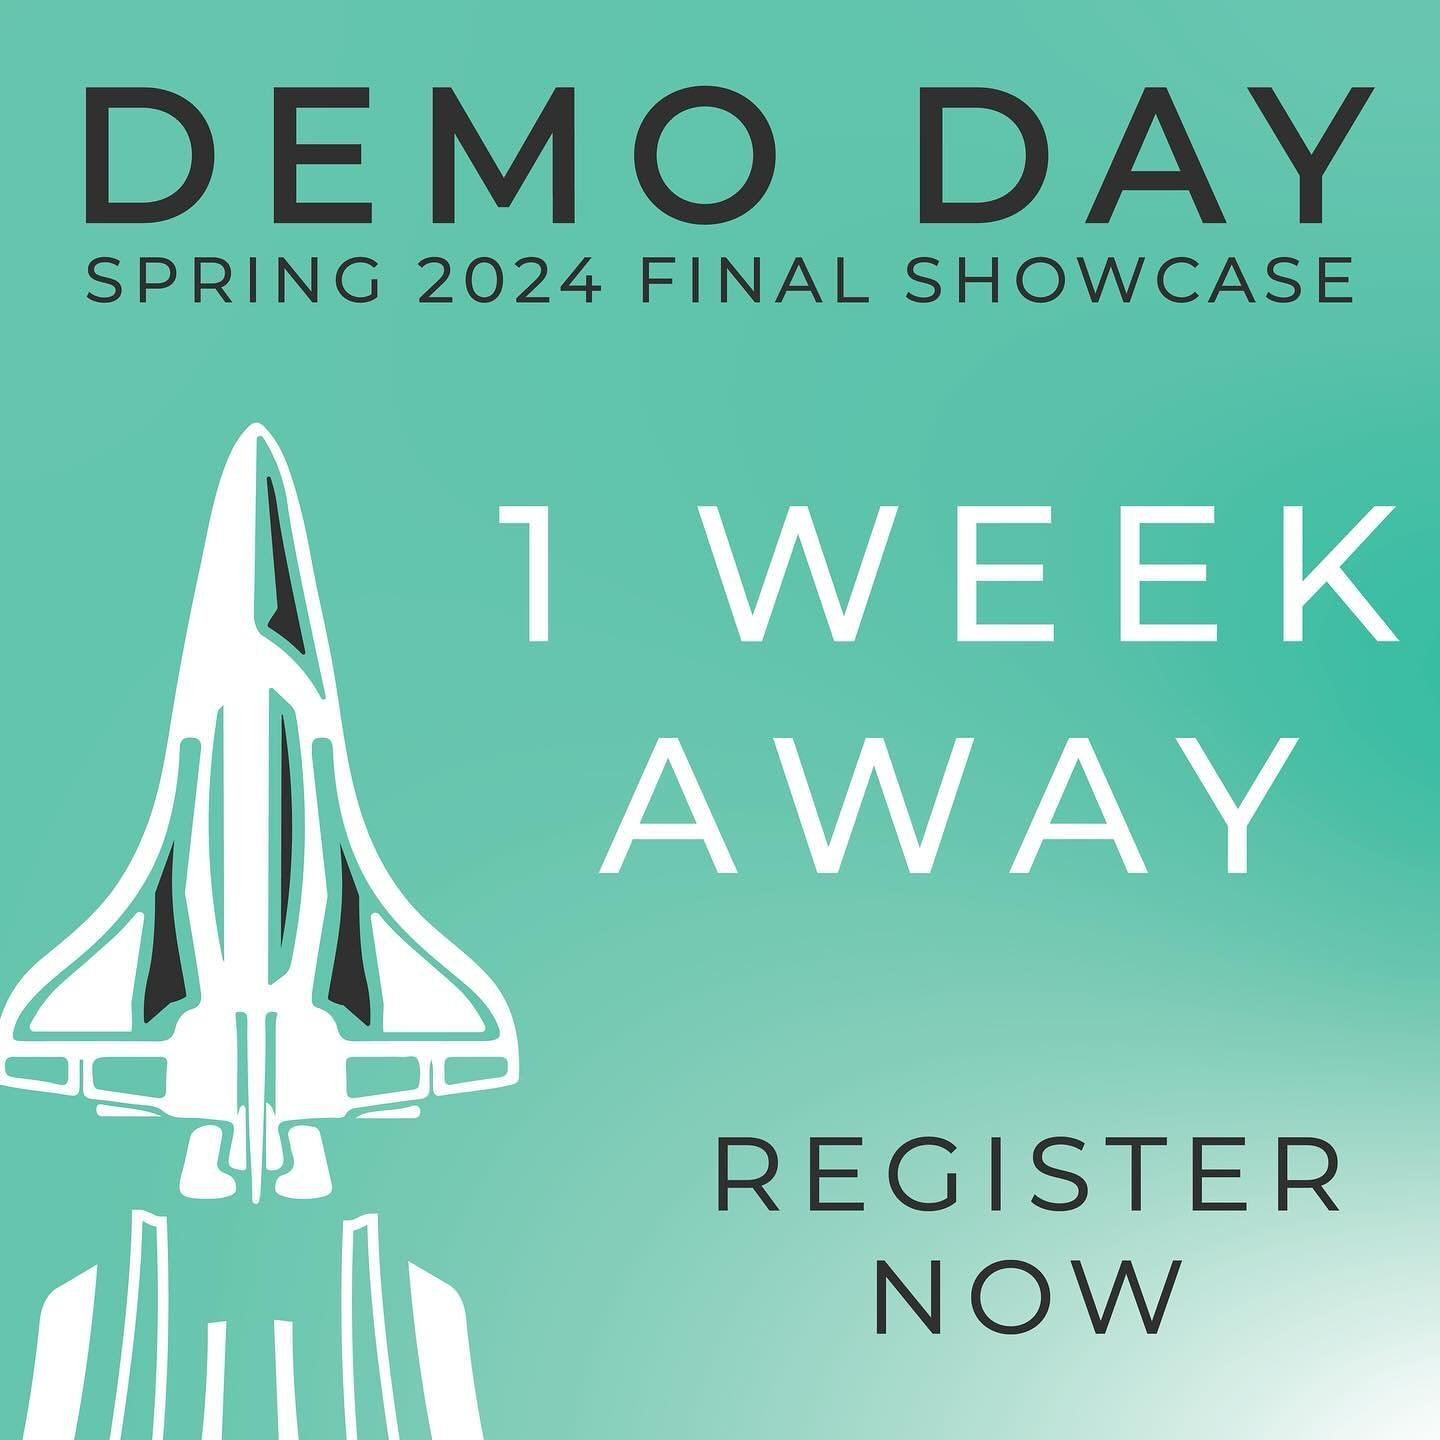 Demo Day is 1 week away! Make sure to register at the link in bio to experience a showcase of Georgetown&rsquo;s best startups! Don&rsquo;t miss it!